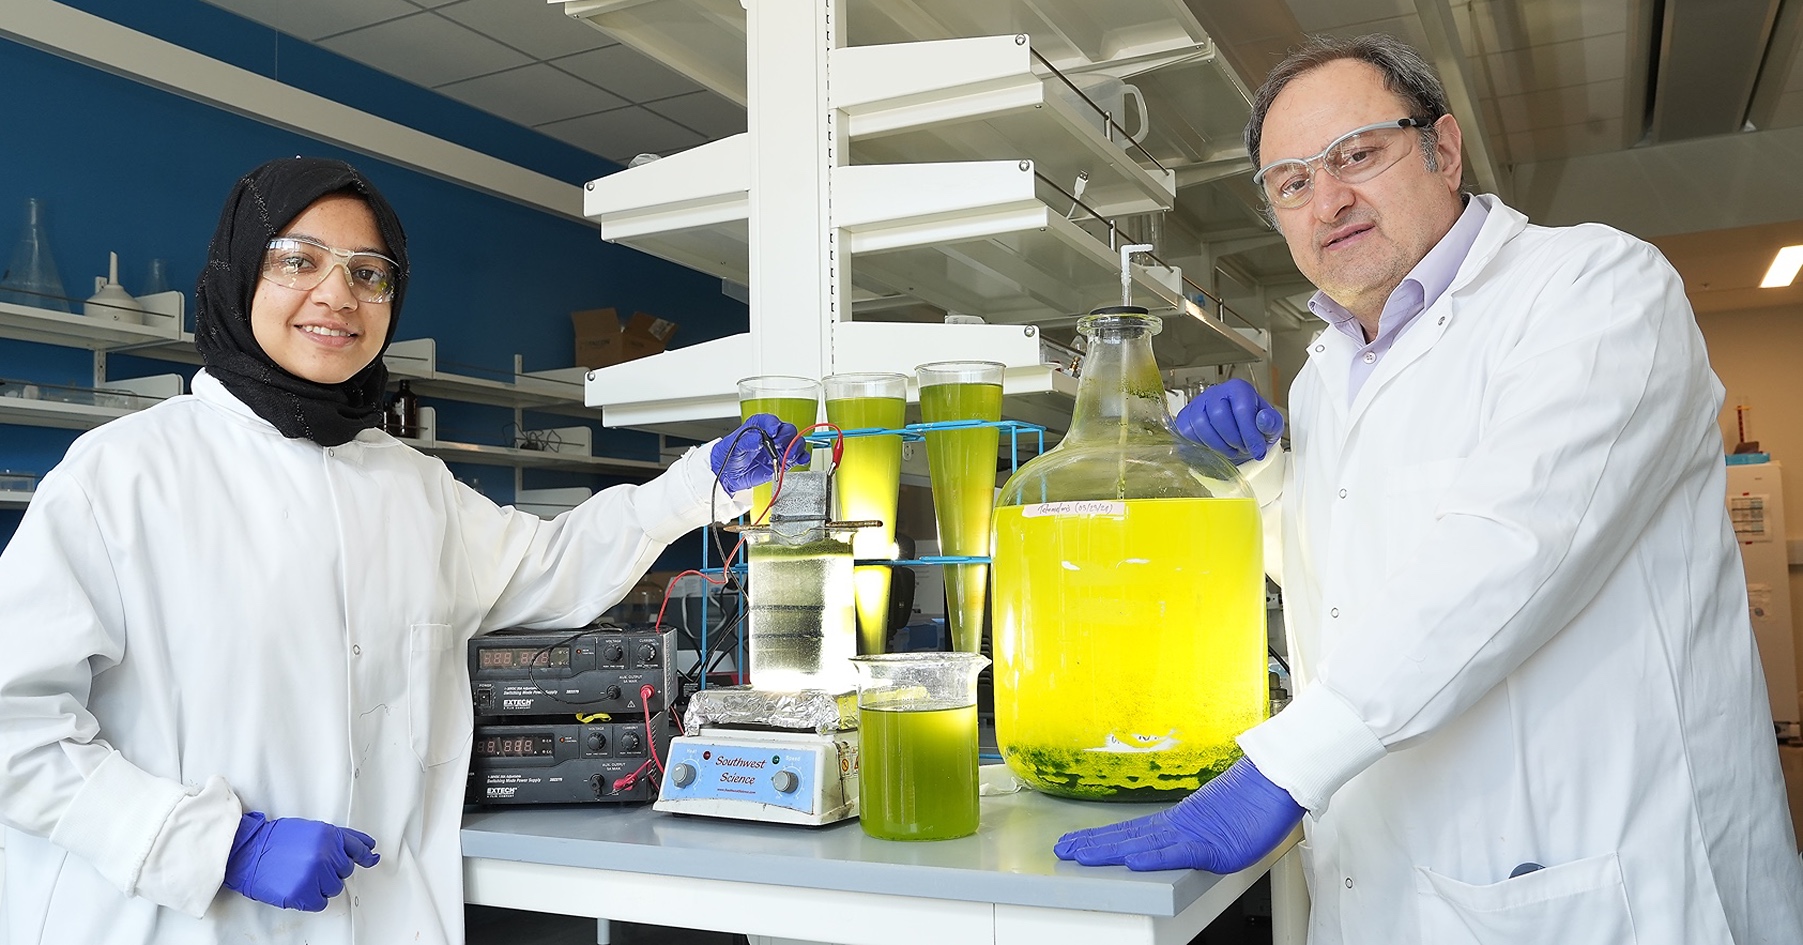 PhD student Nowrin Shaika and professor Halis Simsek, both in agricultural and biological engineering, demonstrate using electrocoagulation to harvest microalgae Chlorella vulgaris from wastewater cleaned with algae.